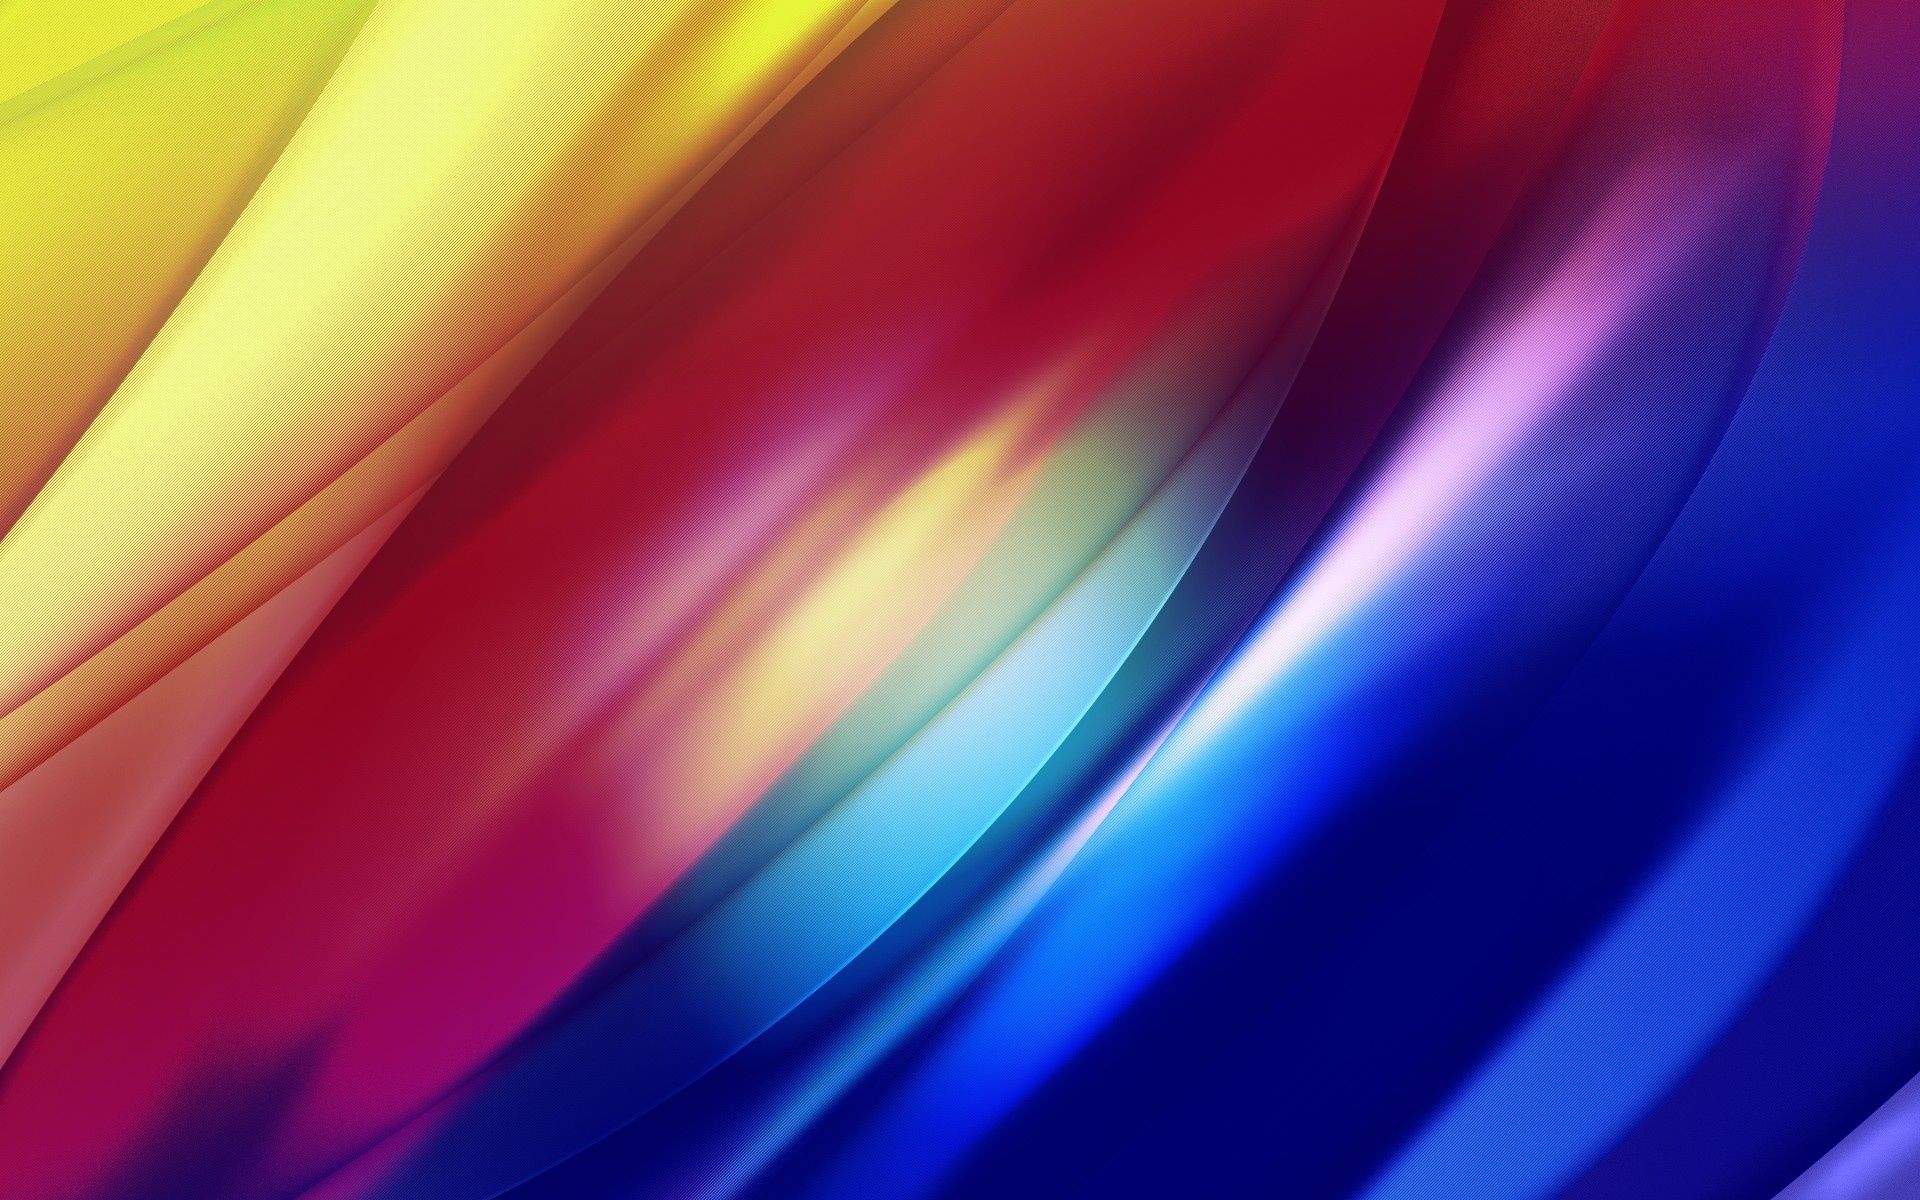 HD wallpaper, Curves, Pixelated, Abstract, Colorful